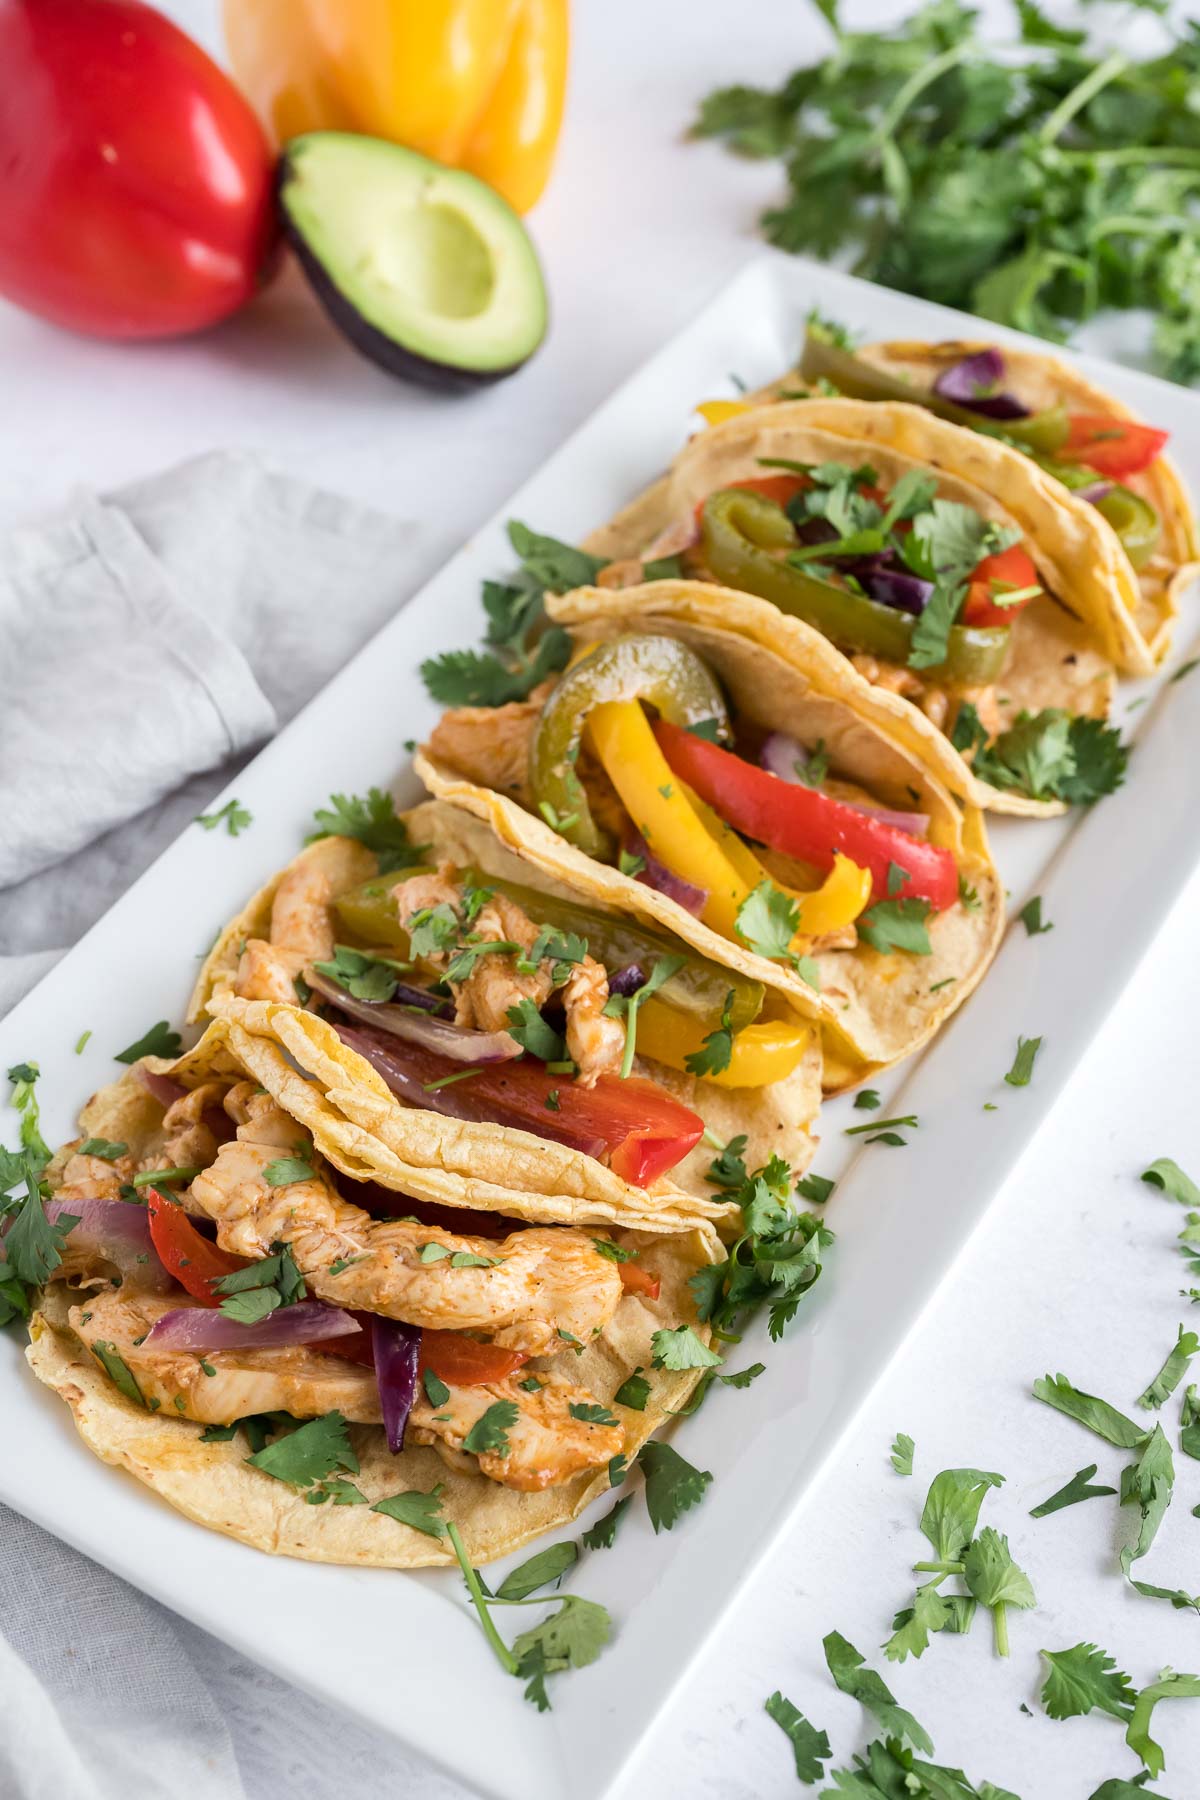 Oven fajitas with baked chicken and veggies in toasted corn tortillas.